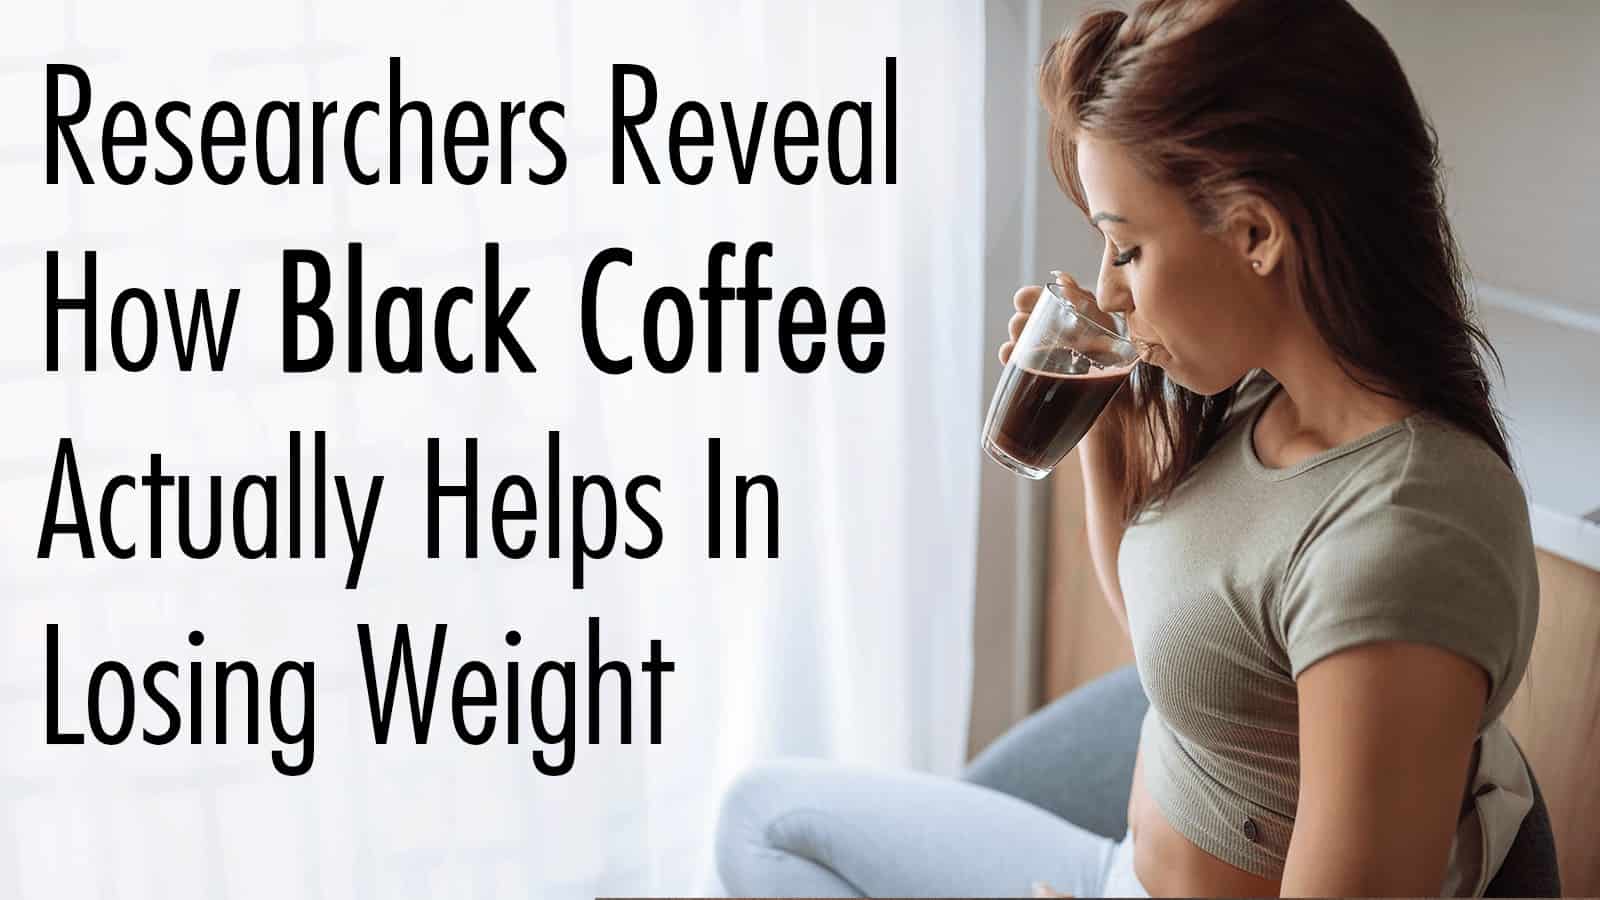 Researchers Reveal How Black Coffee Actually Helps In Losing Weight